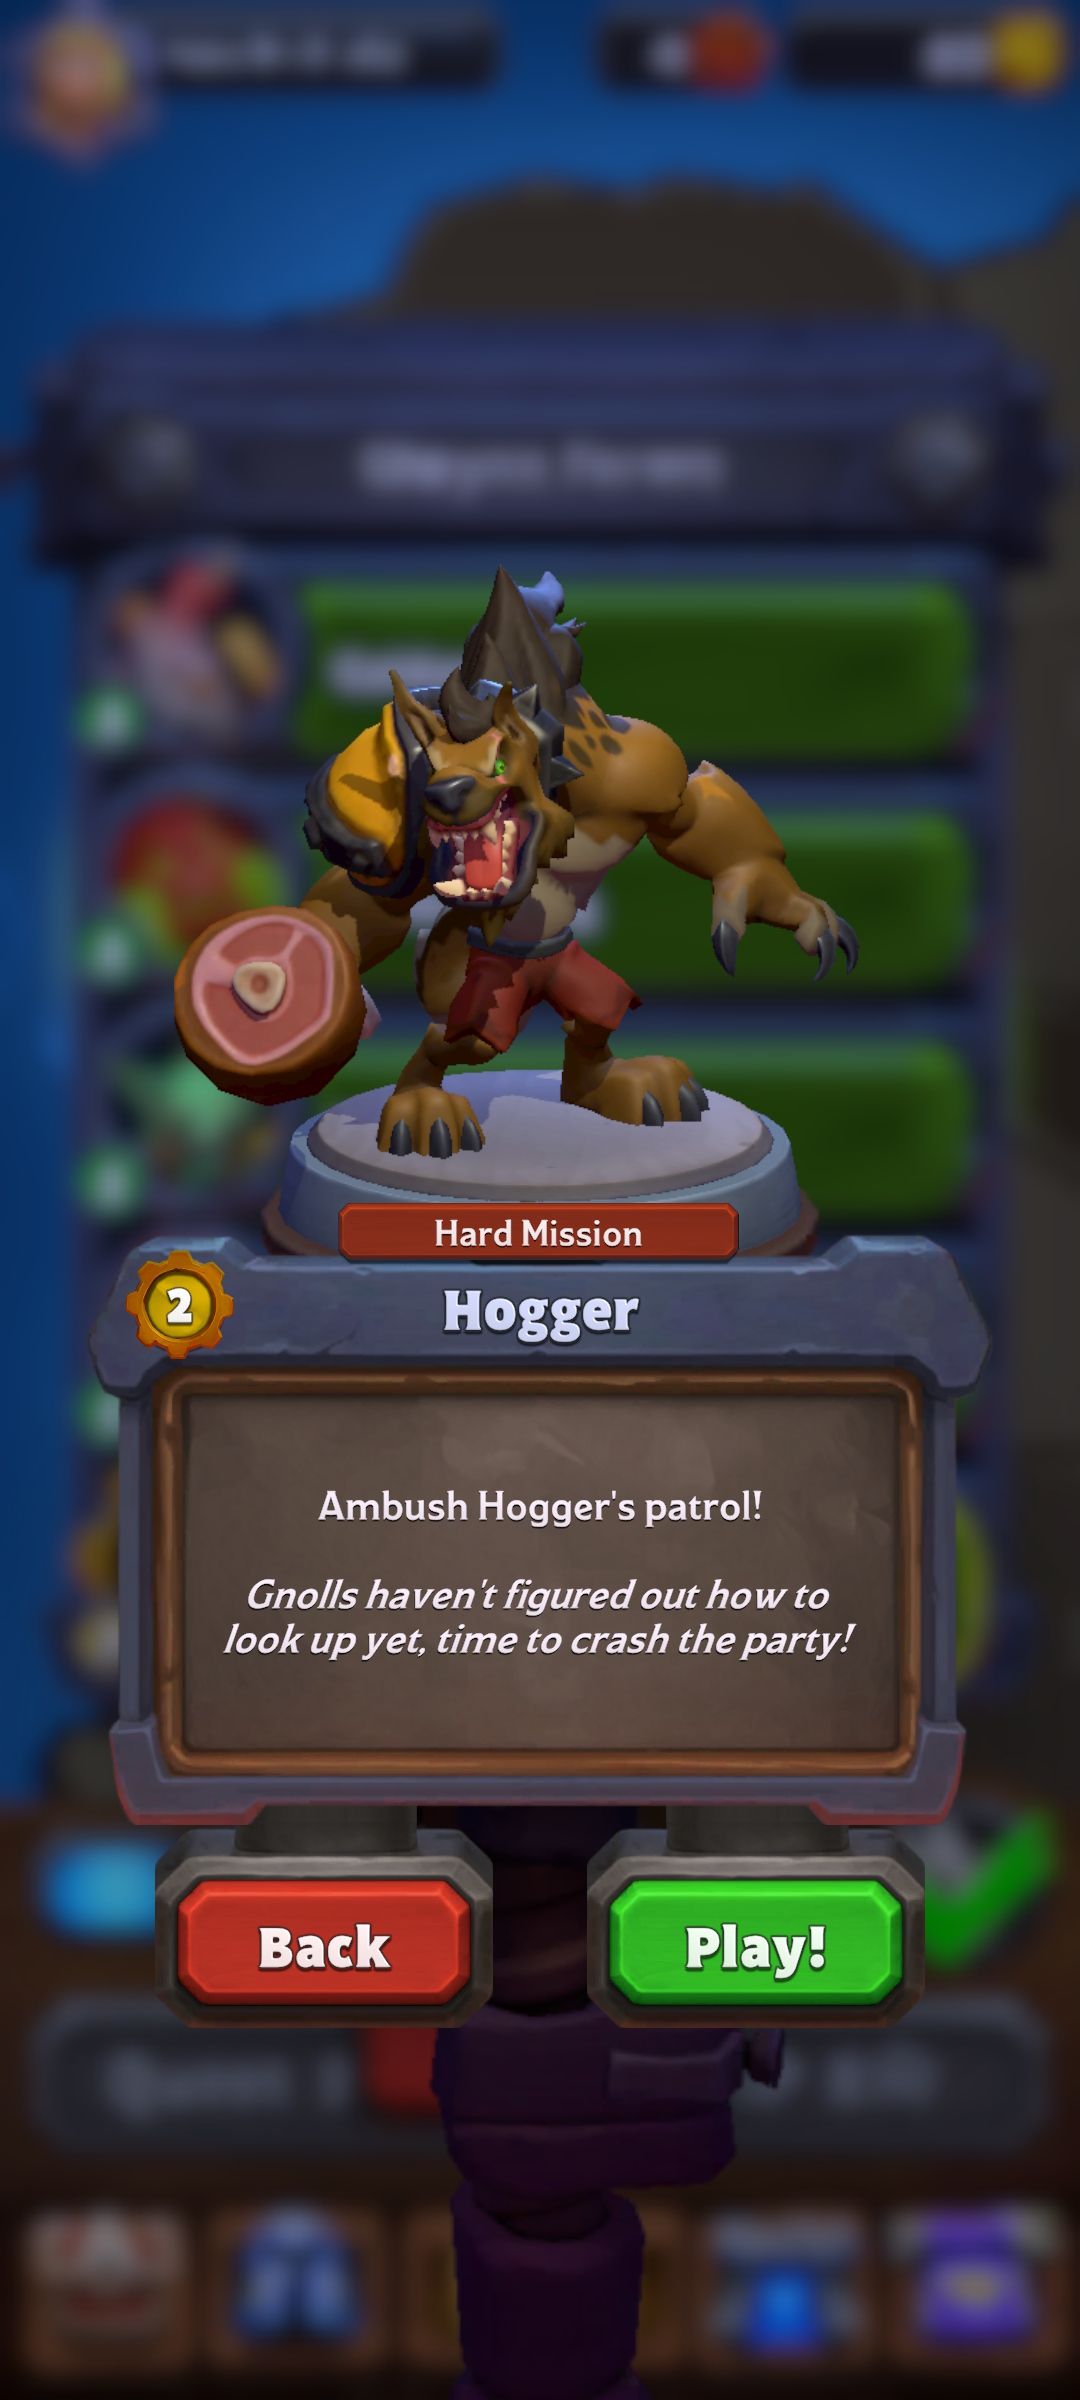 Hogger enemy level hint with play and back button